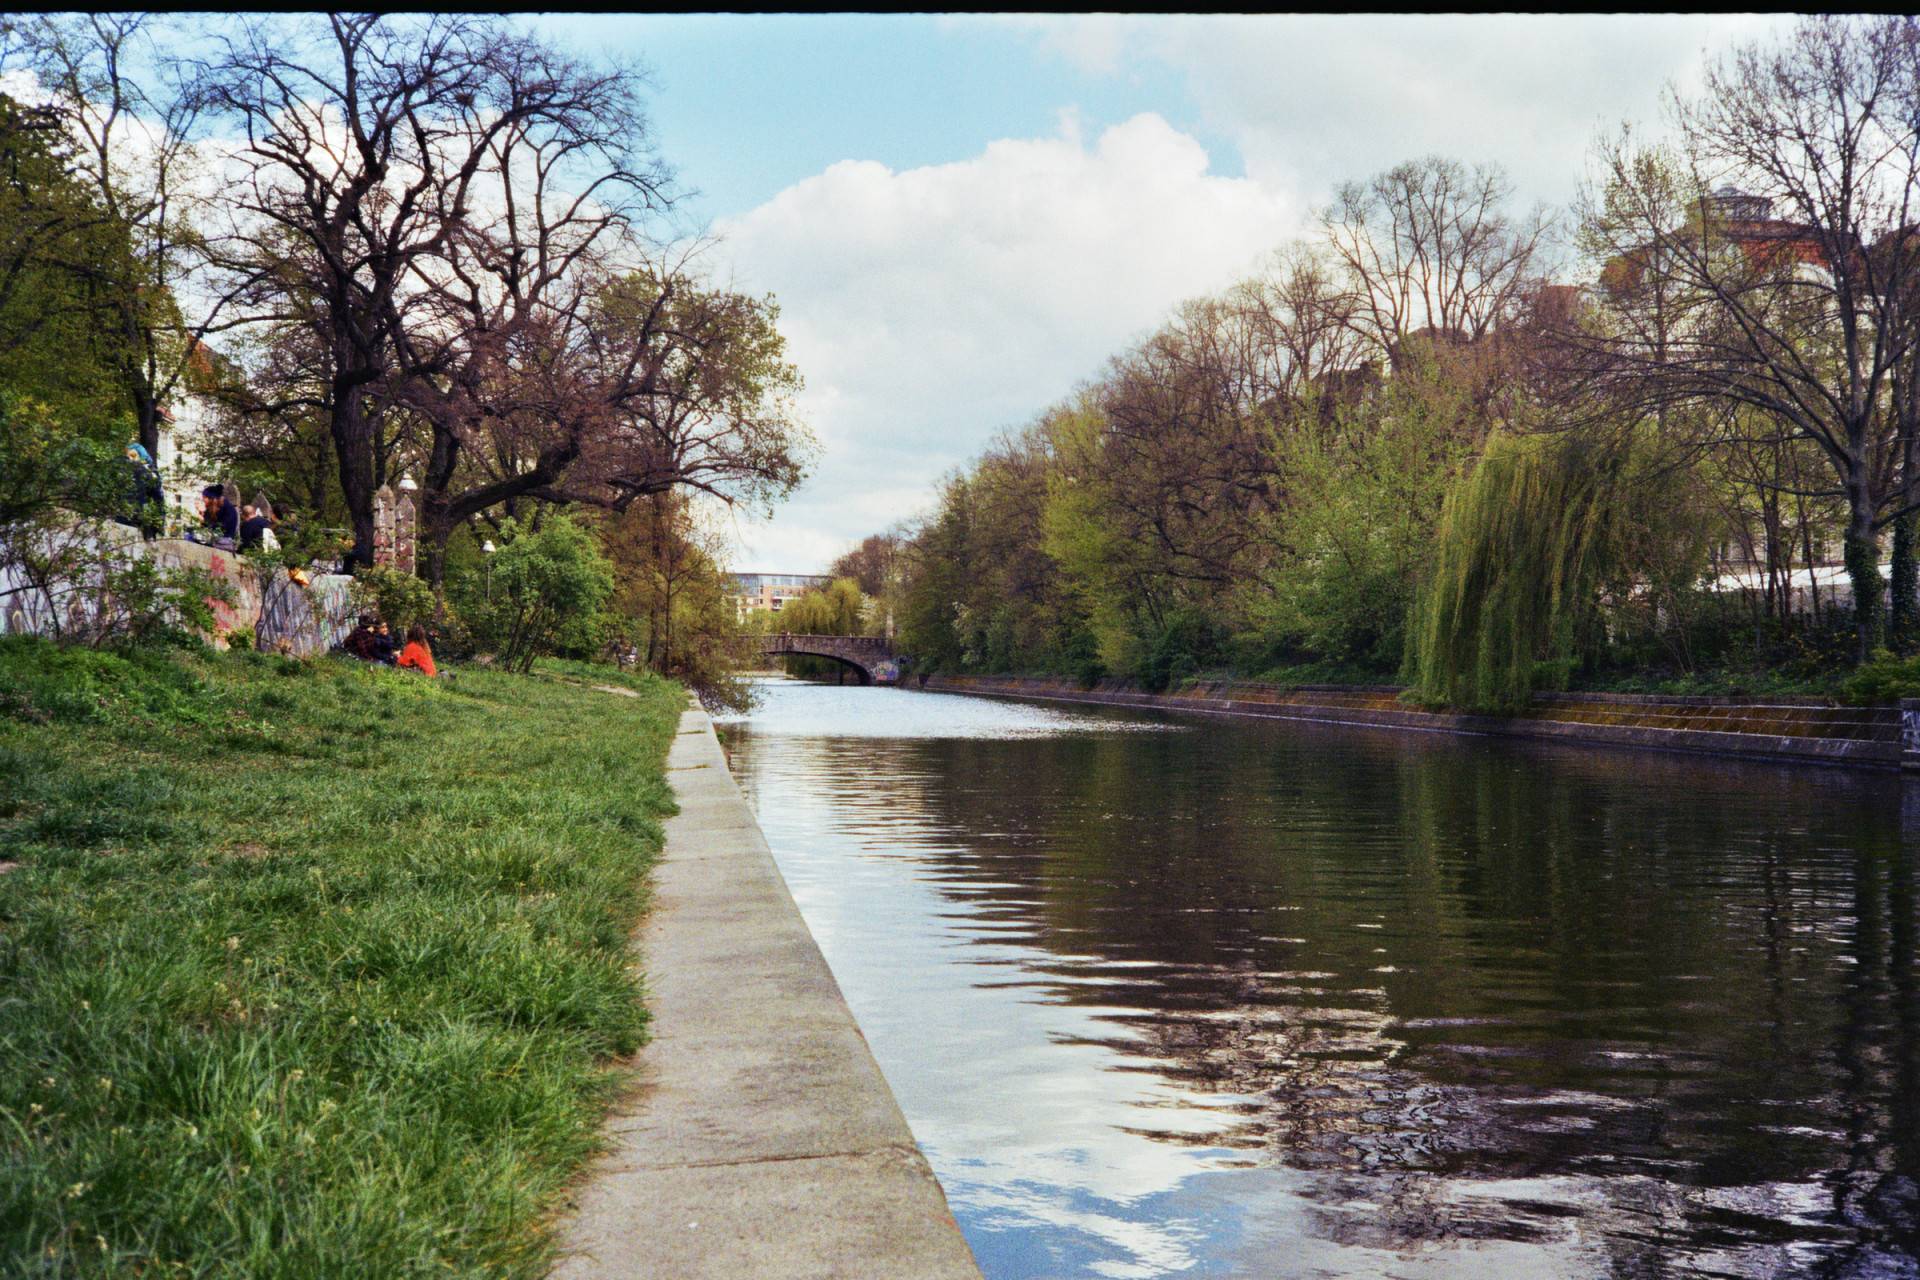 a canal surrounded with green and brown trees and grass areas, some people sitting on the left side and some buildings can be seen behind the trees